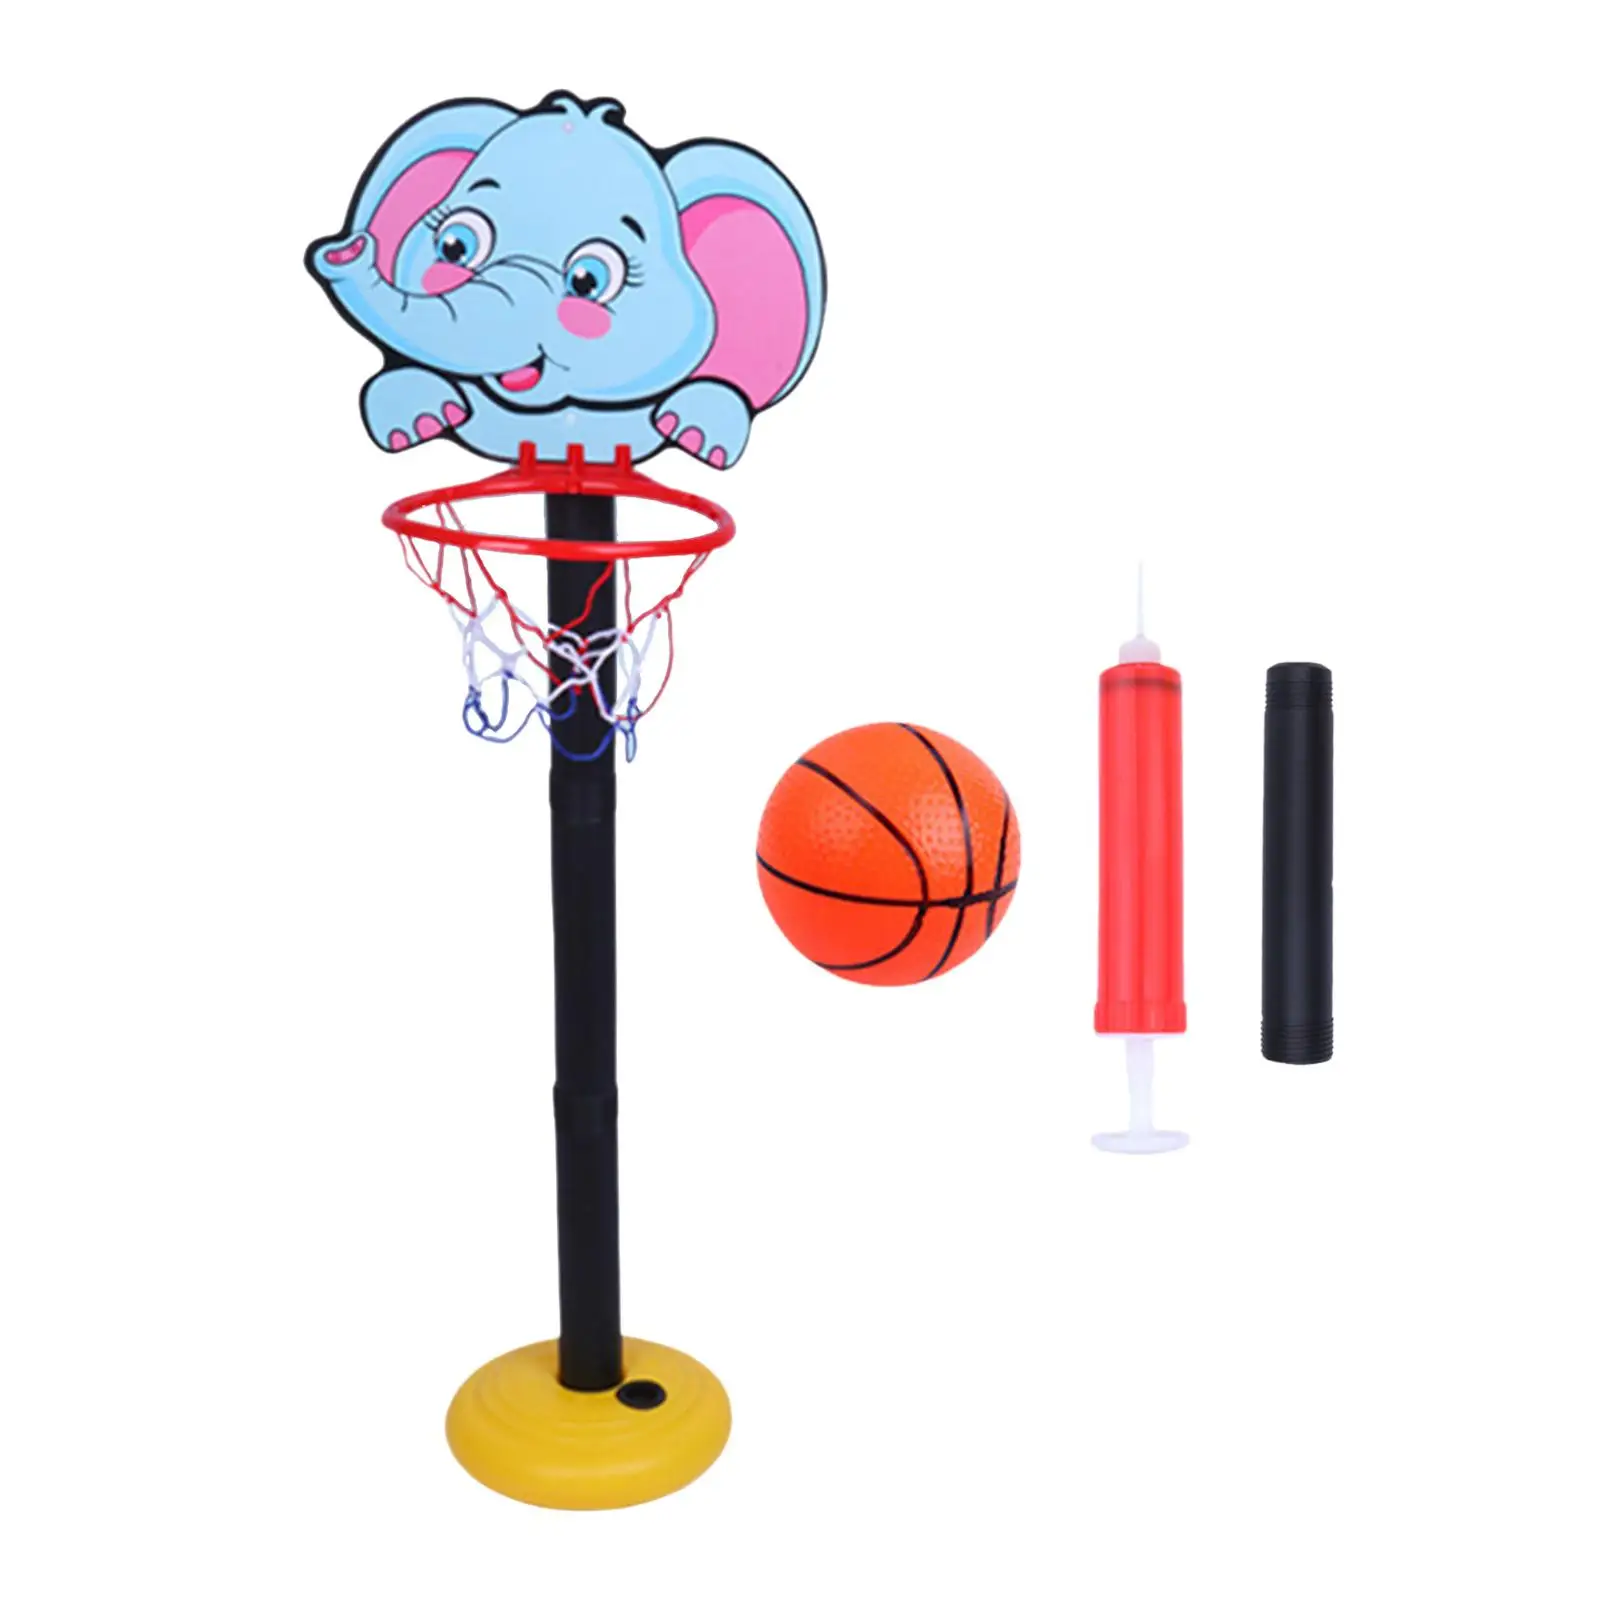 Portable Basketball Hoop Toys Outdoor Sports Playing Set Balls Playset Mini Basketball Set for Indoor Wall Office Outdoor Garden